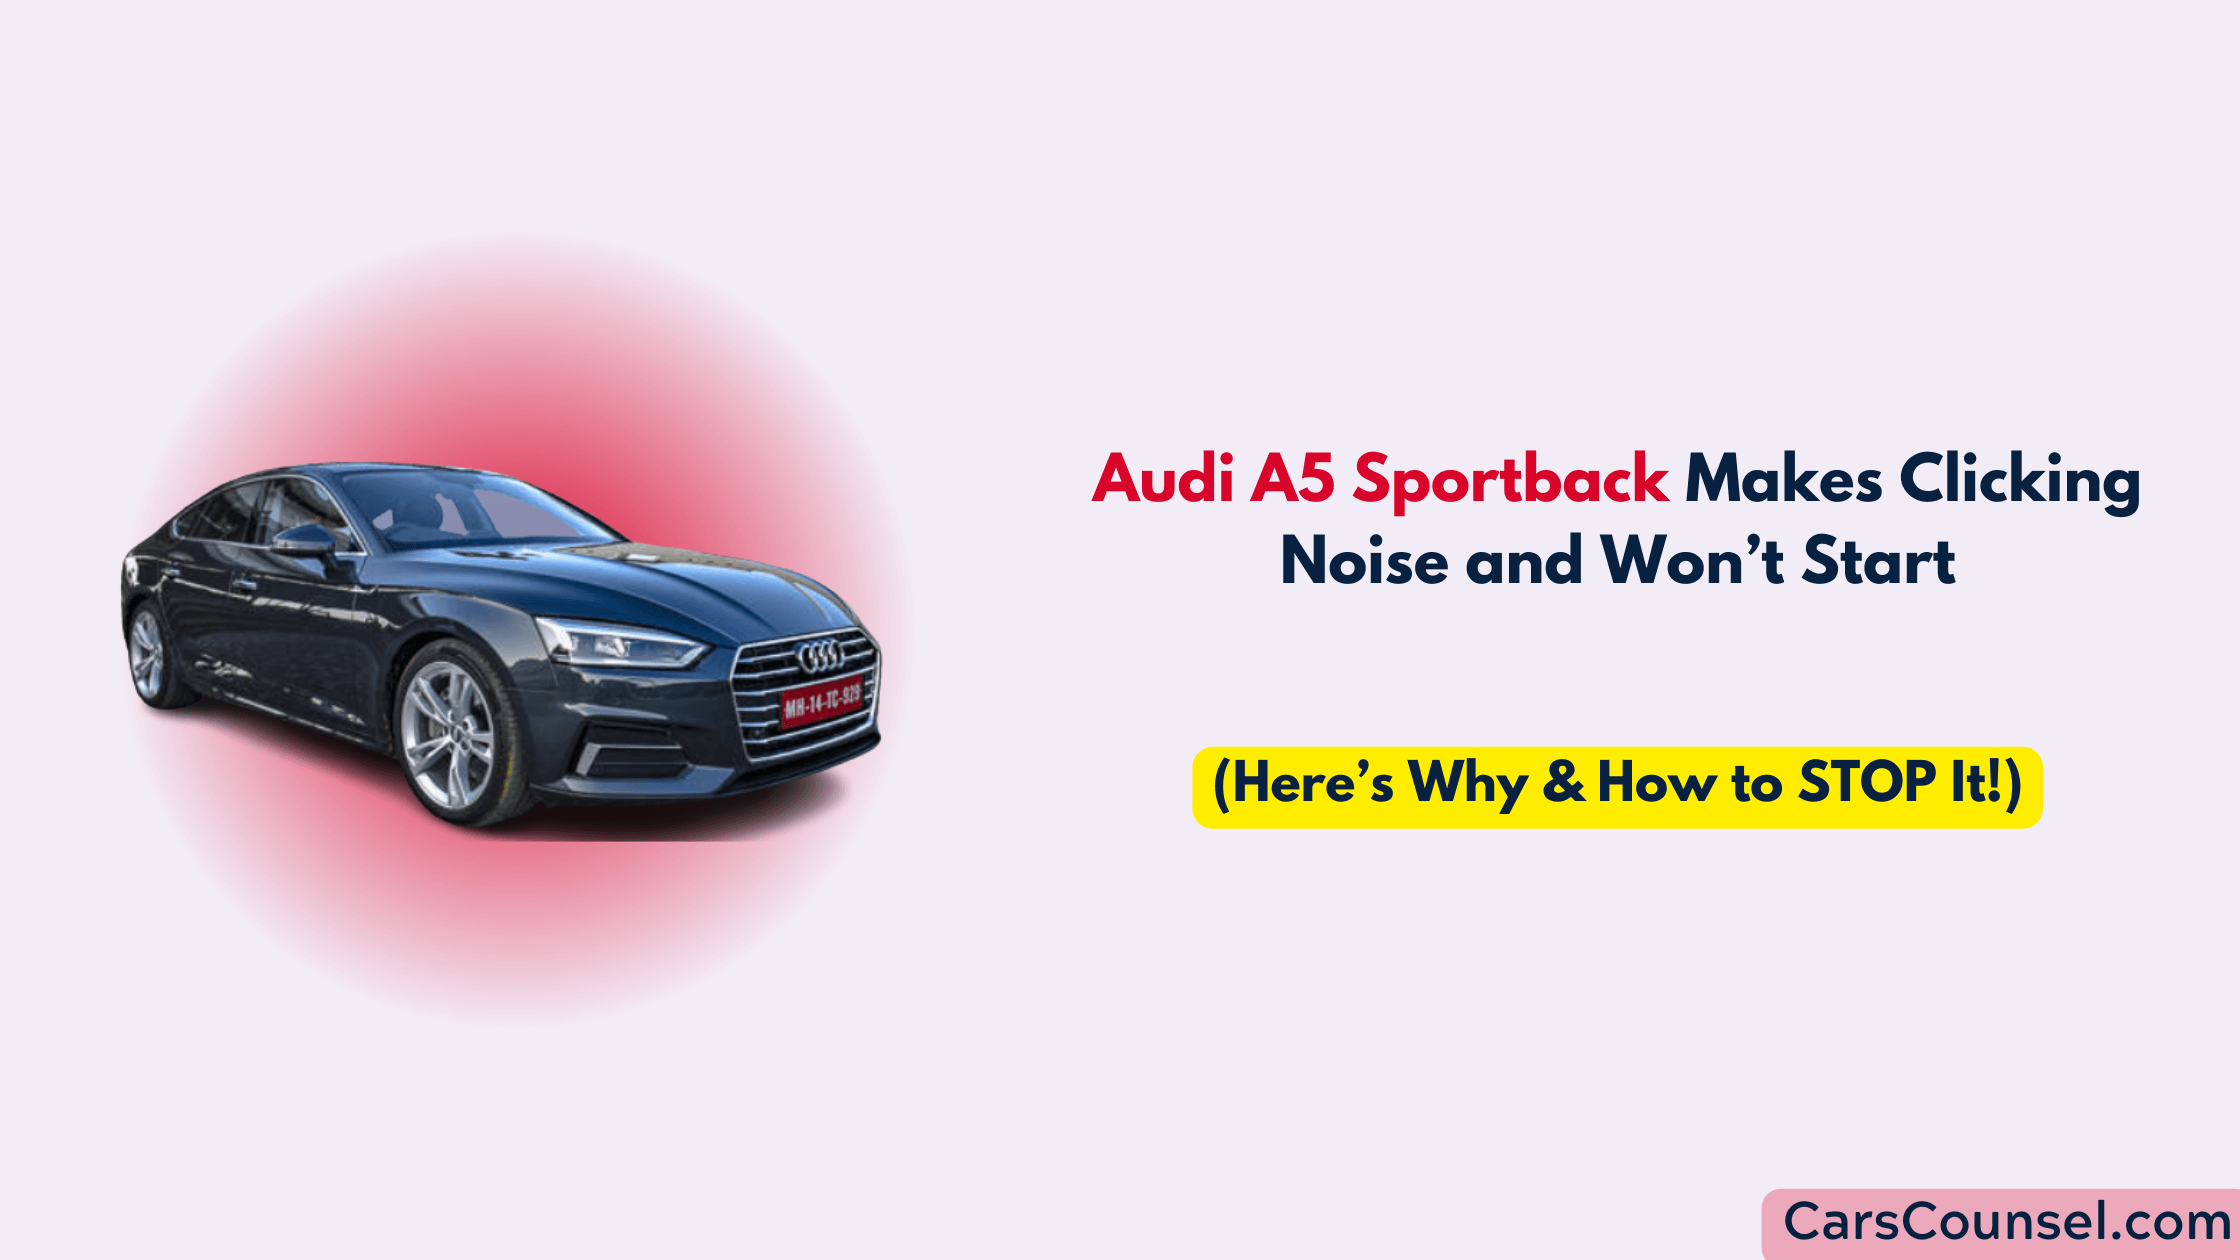 Audi A5 Sportback Clicking Noise And Won’t Start